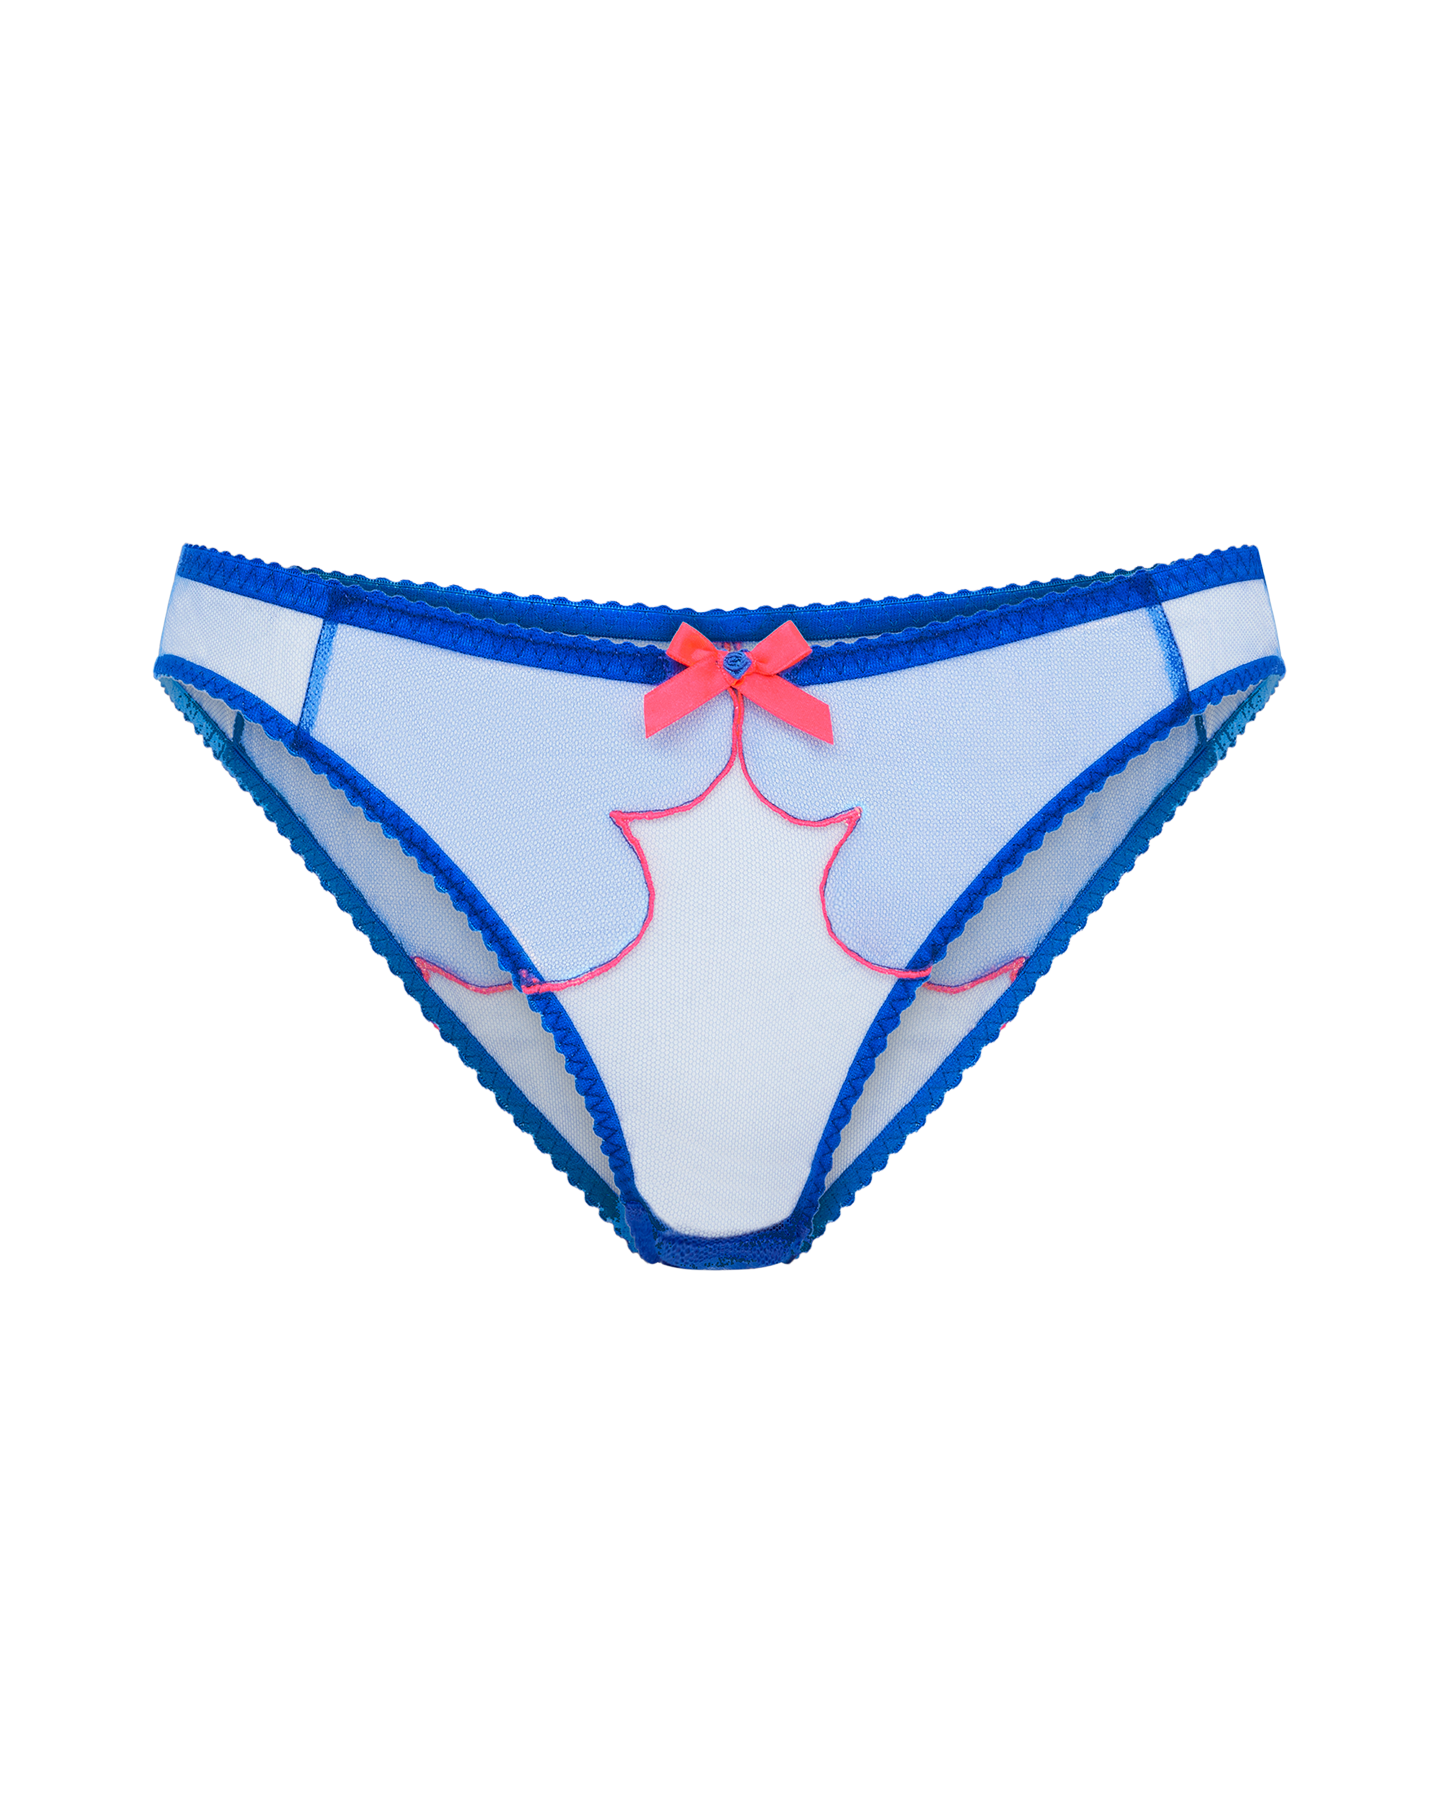 Lorna Full Brief in Blue/Neon Pink | By Agent Provocateur